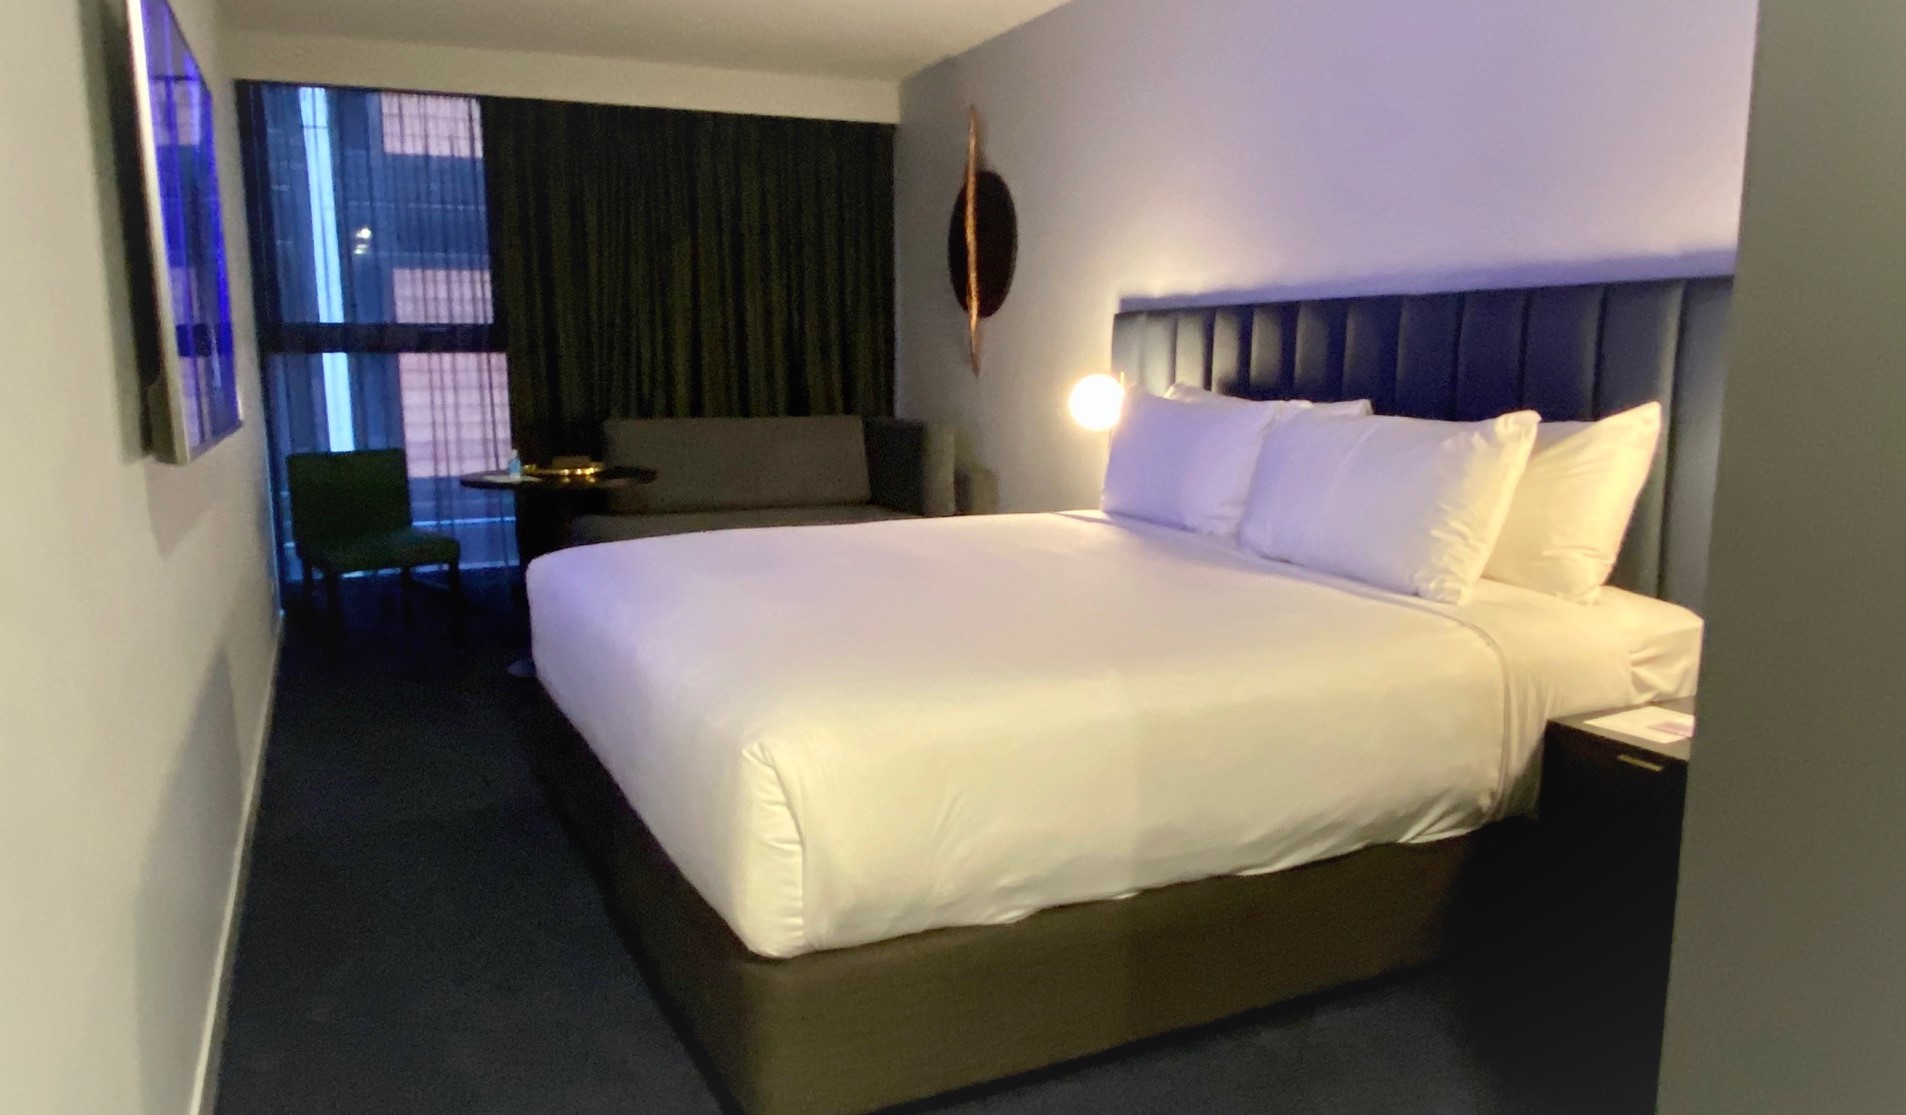 King Bed, Midnight Hotel Canberra